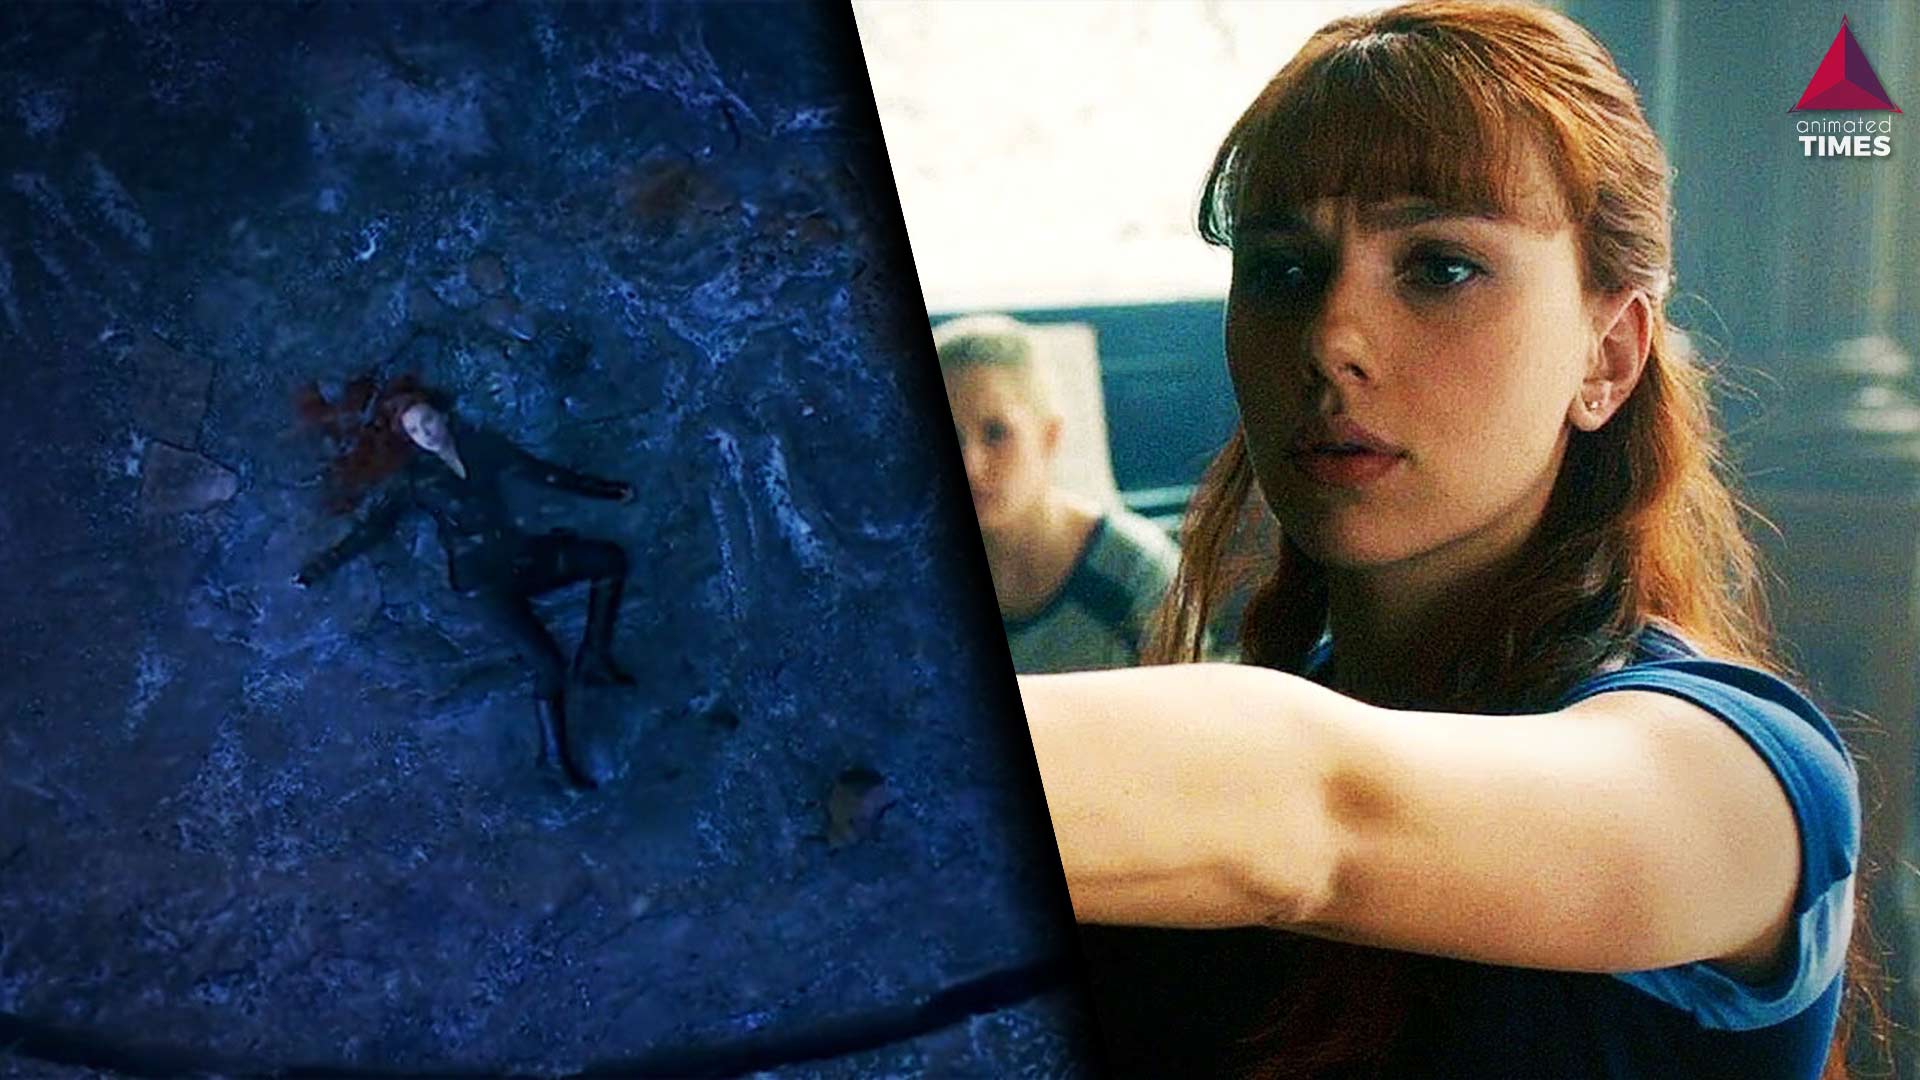 Black Widow: All Questions About Natasha Romanoff That Need To Be Answered